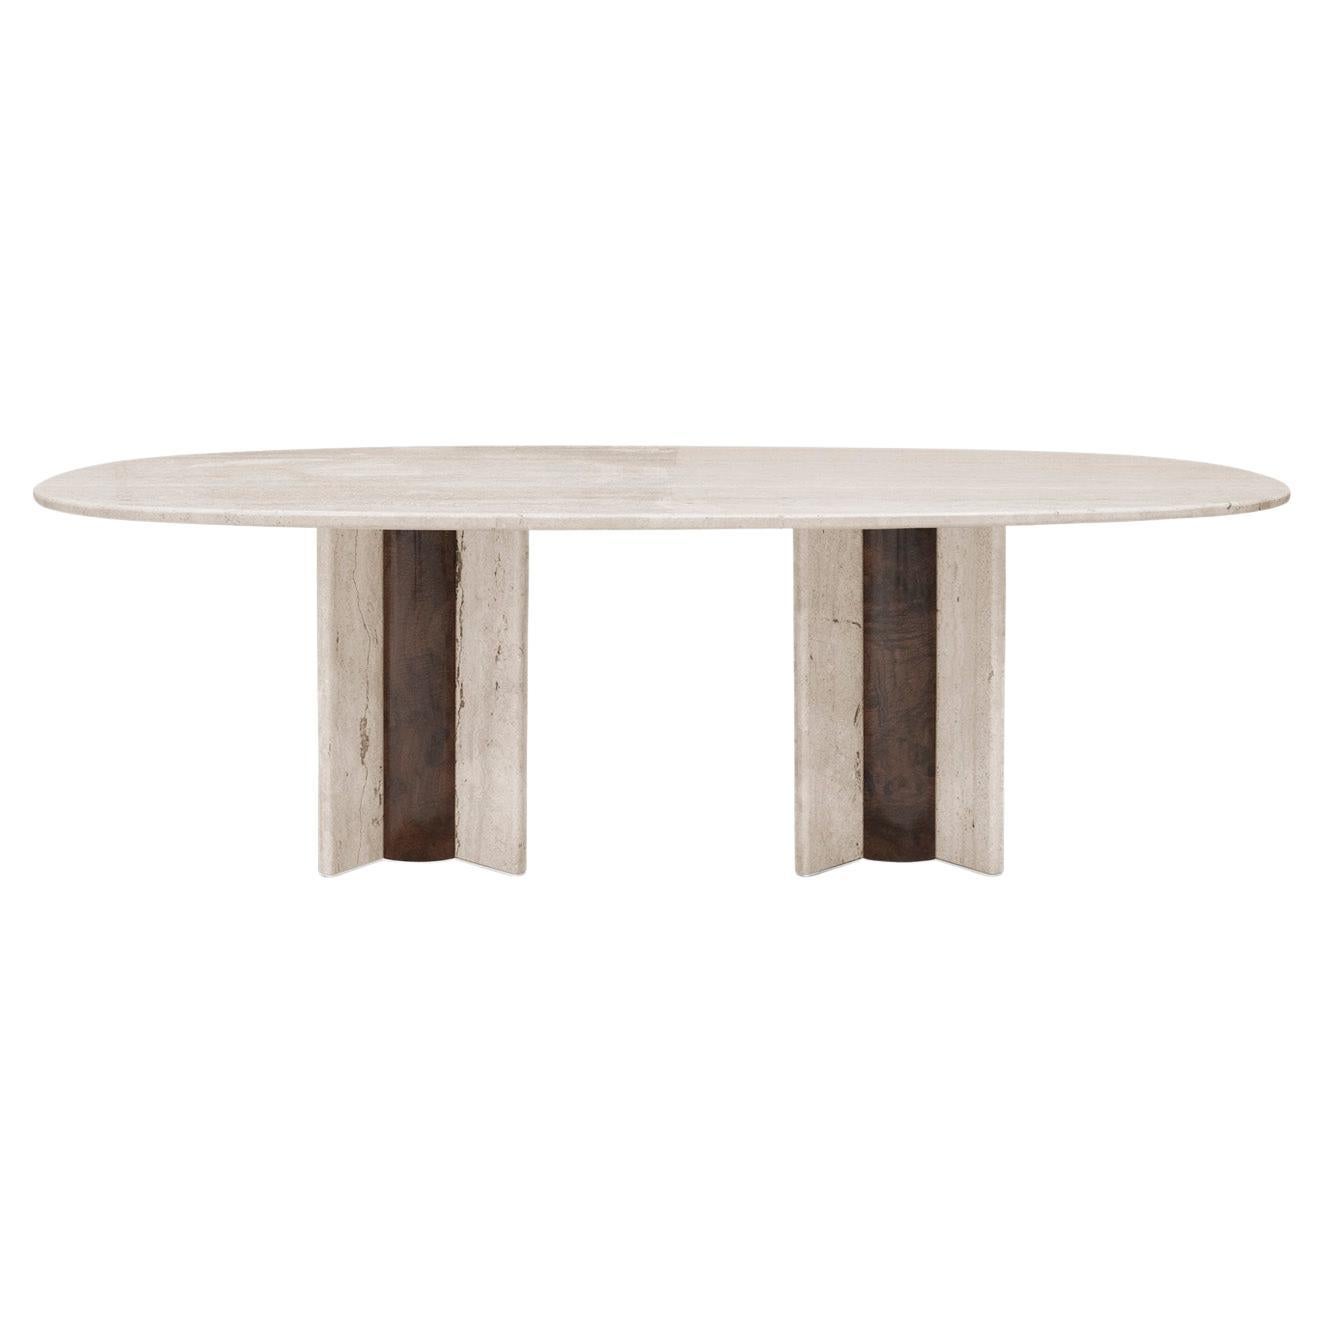 Paris Travertine Marble Oval Dining Table For Sale